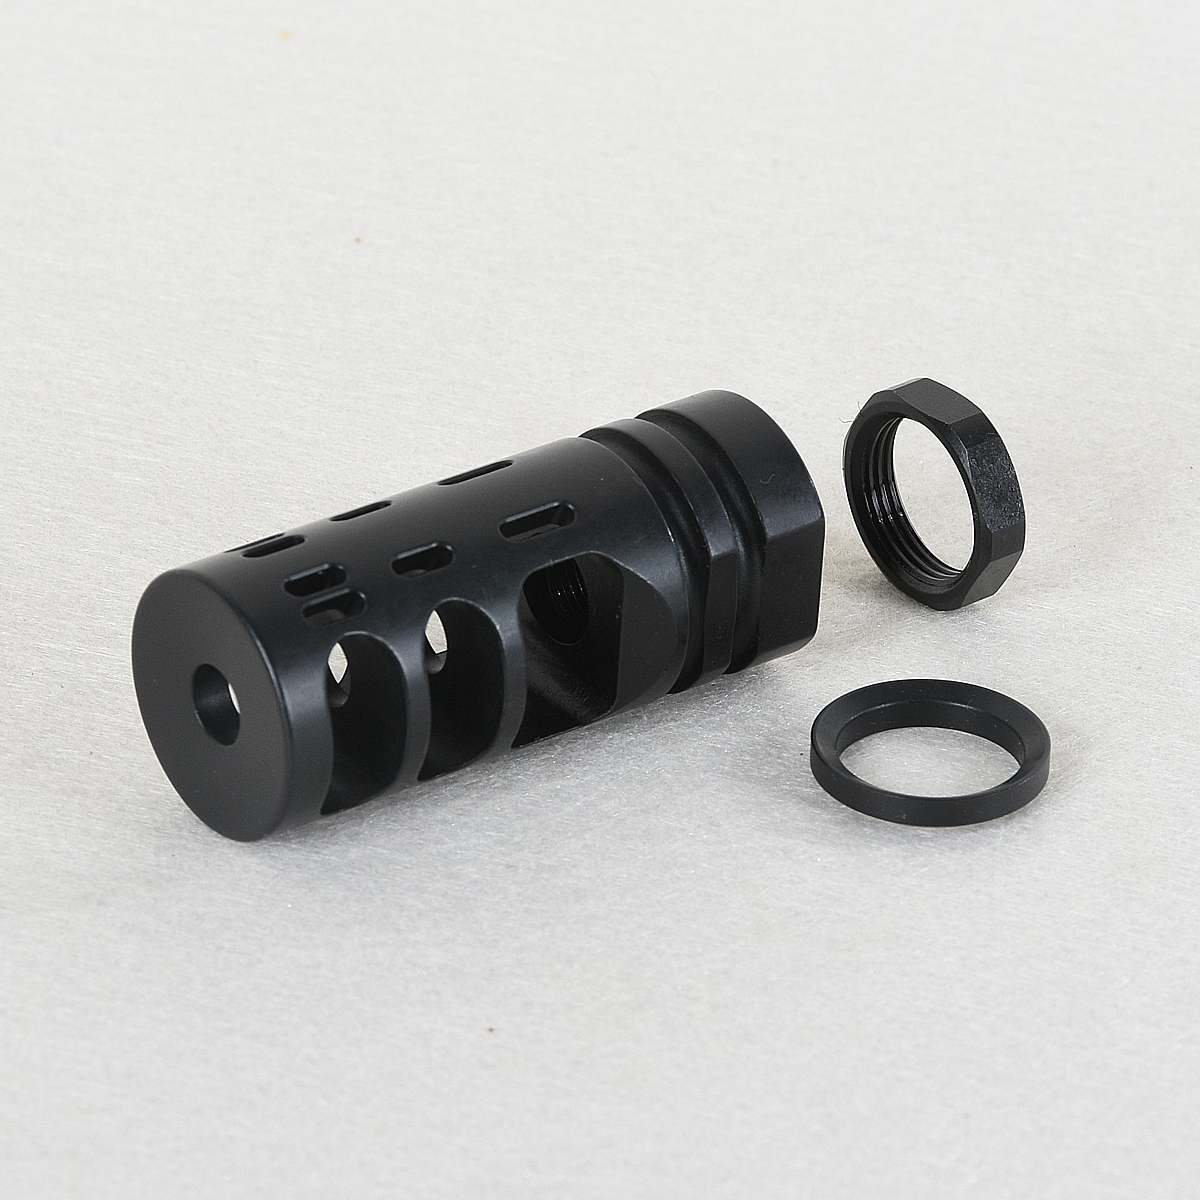 .308 7.62 Muzzle Brake for 5//8x24 Thread with Jam Nut and Crush Washer